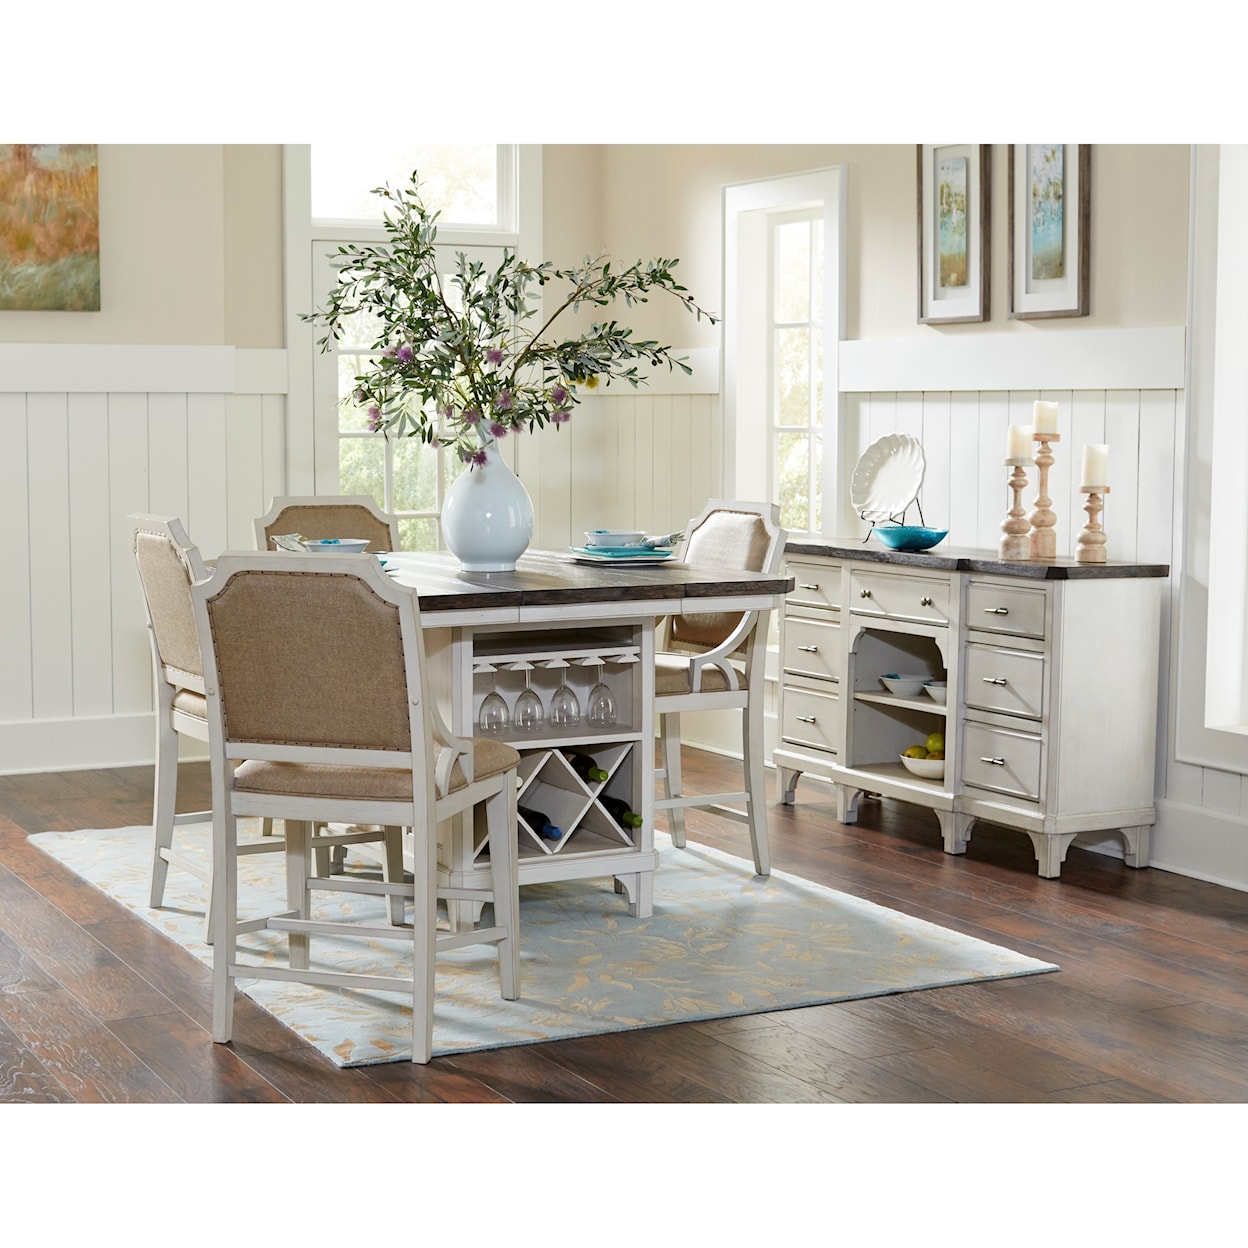 Avalon Furniture Mystic Cay Gathering Chair